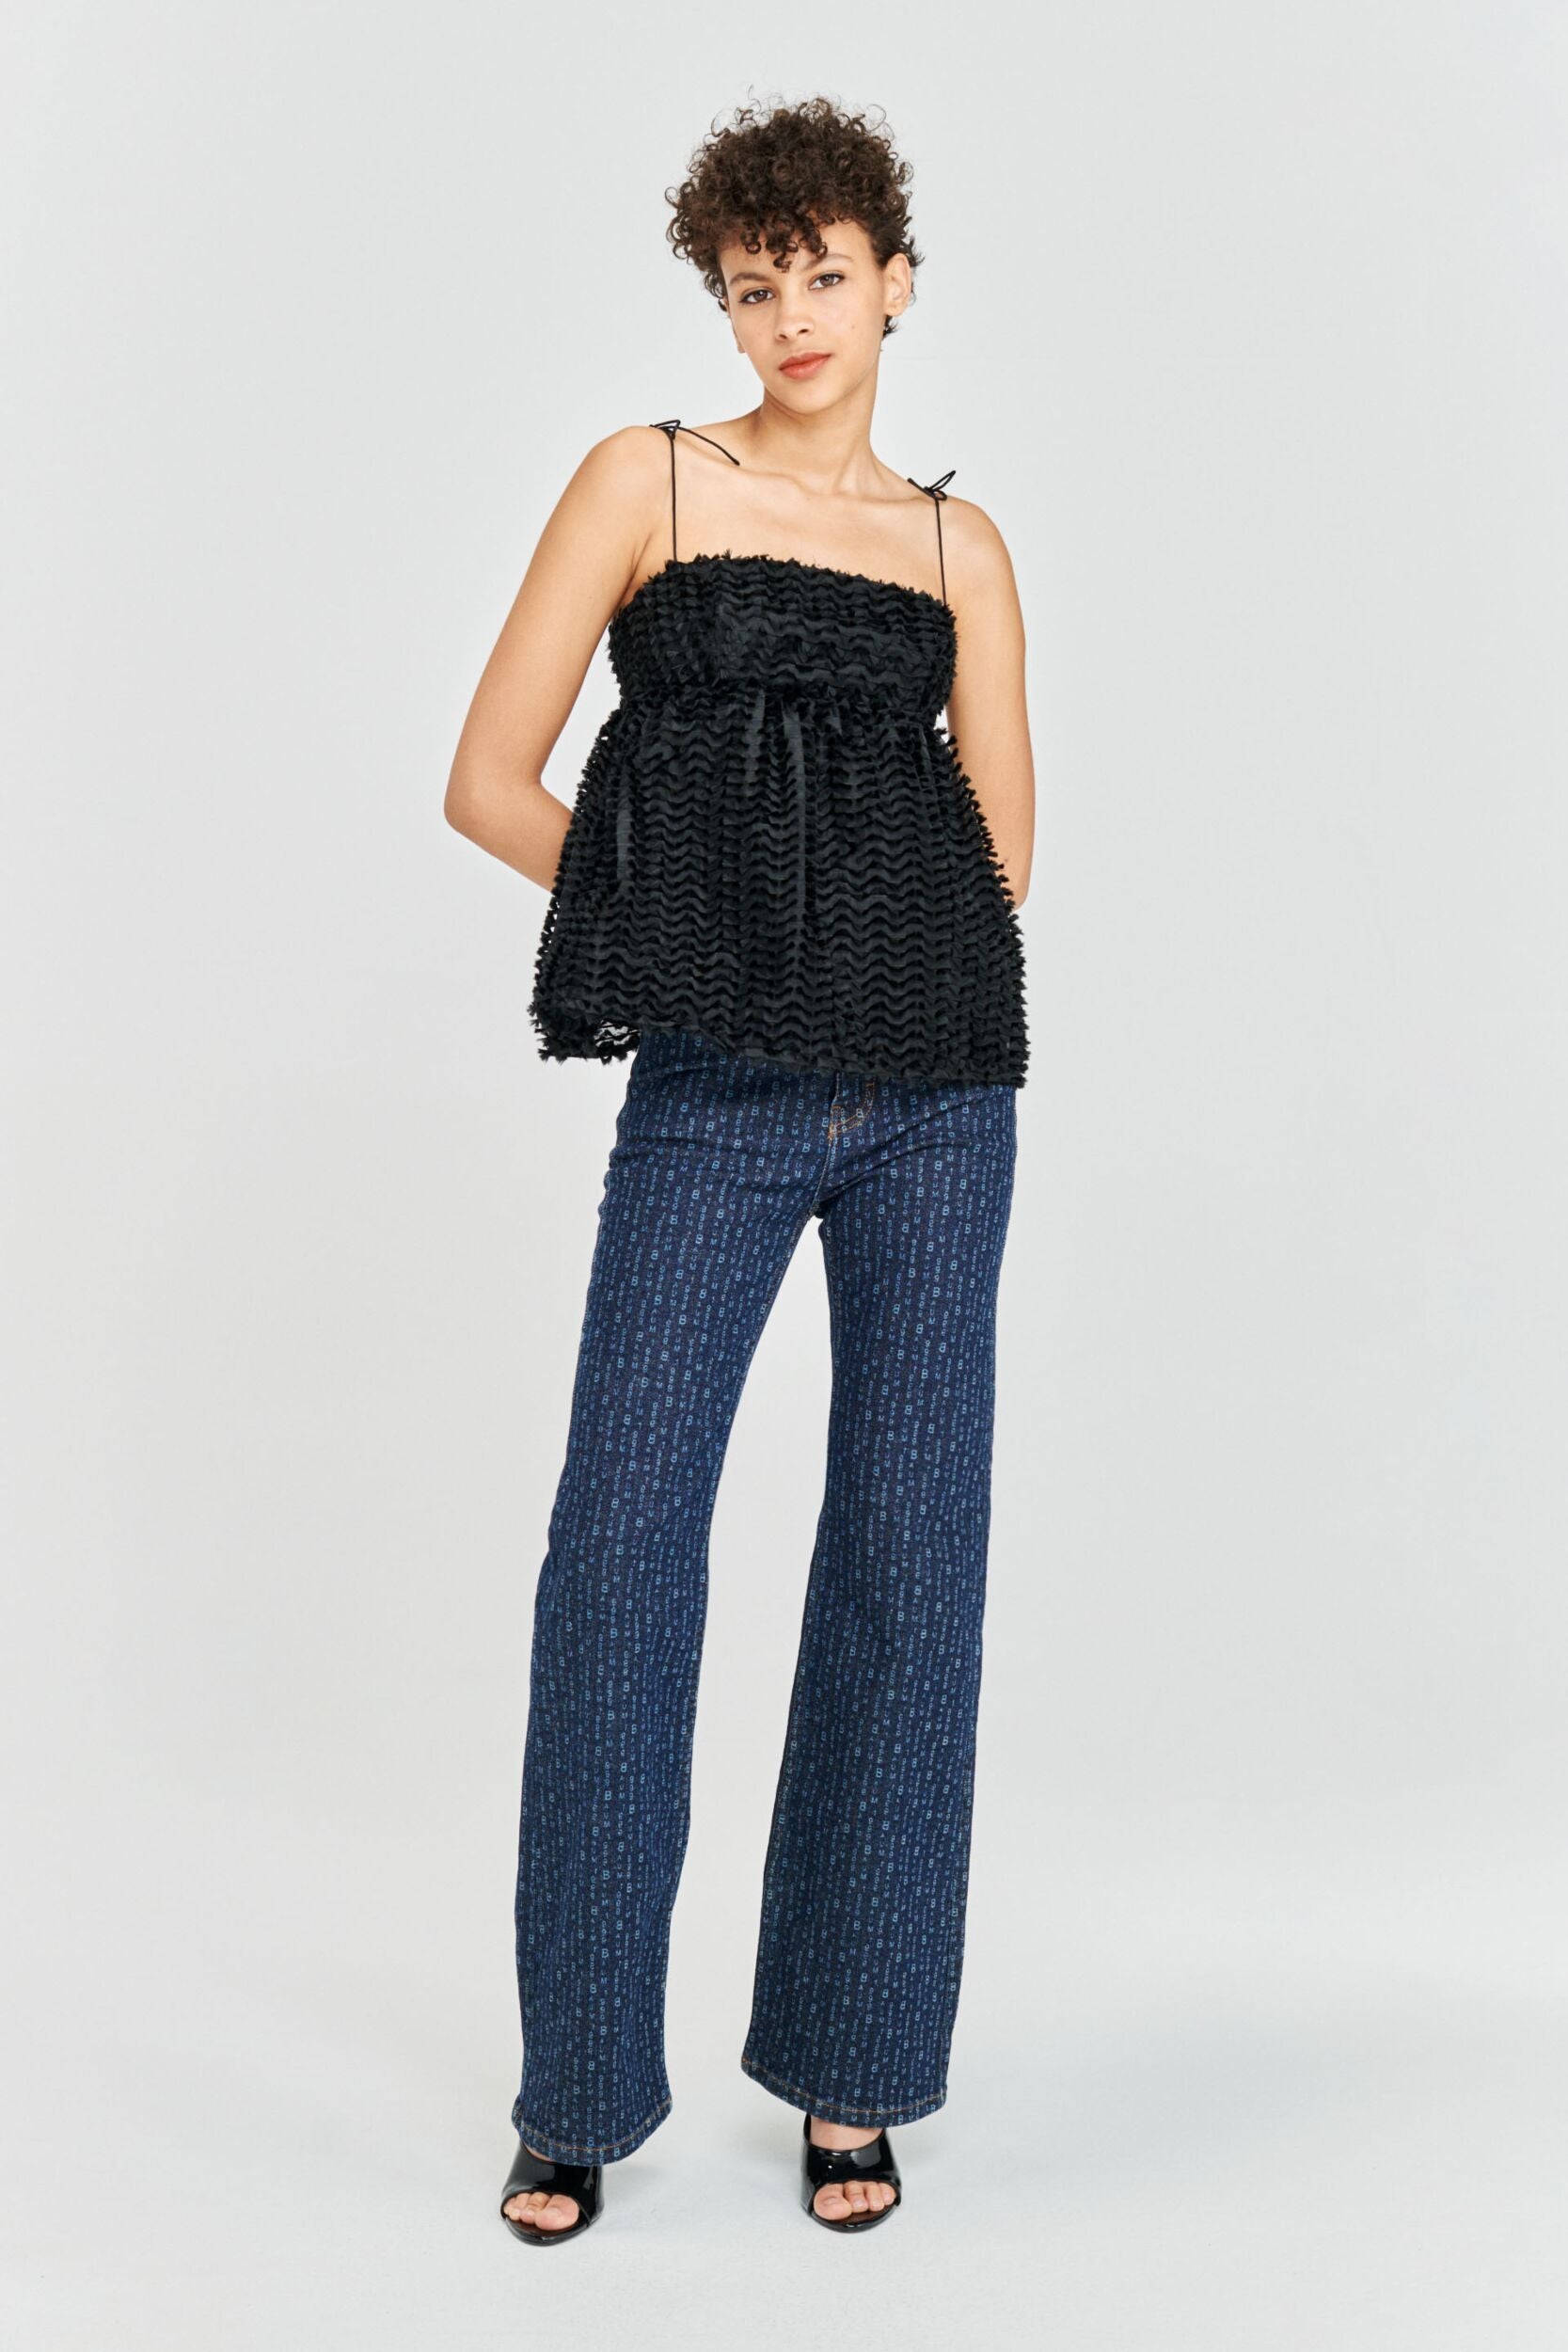 Strappy black top with spaghetti straps and tiny tassel details on fabric